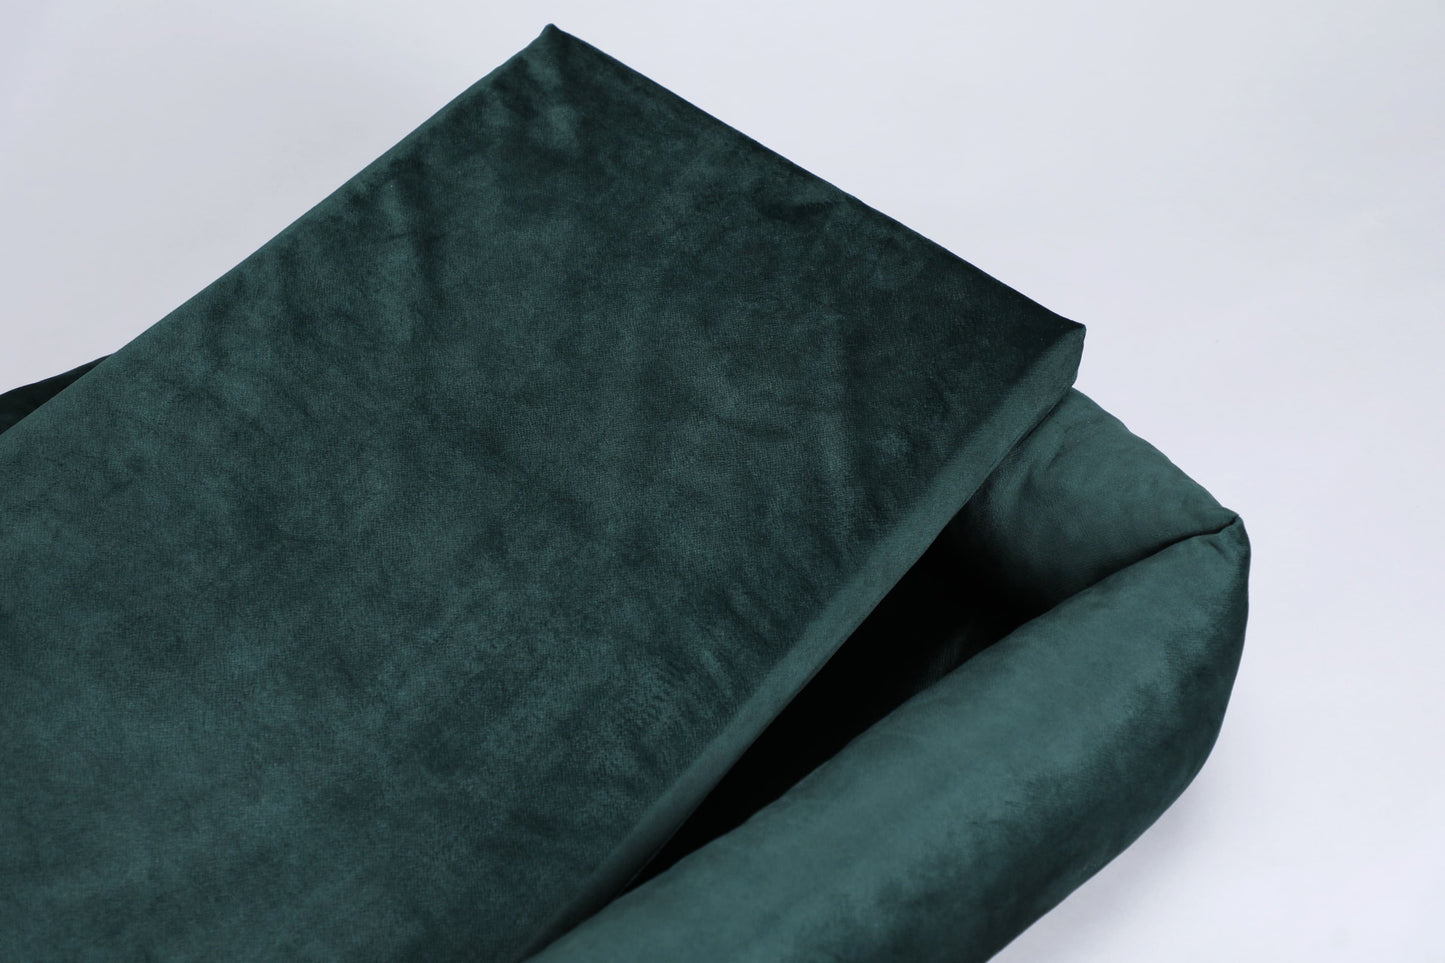 2-sided dog bed with sides. EMERALD GREEN - premium dog goods handmade in Europe by My Wild Other